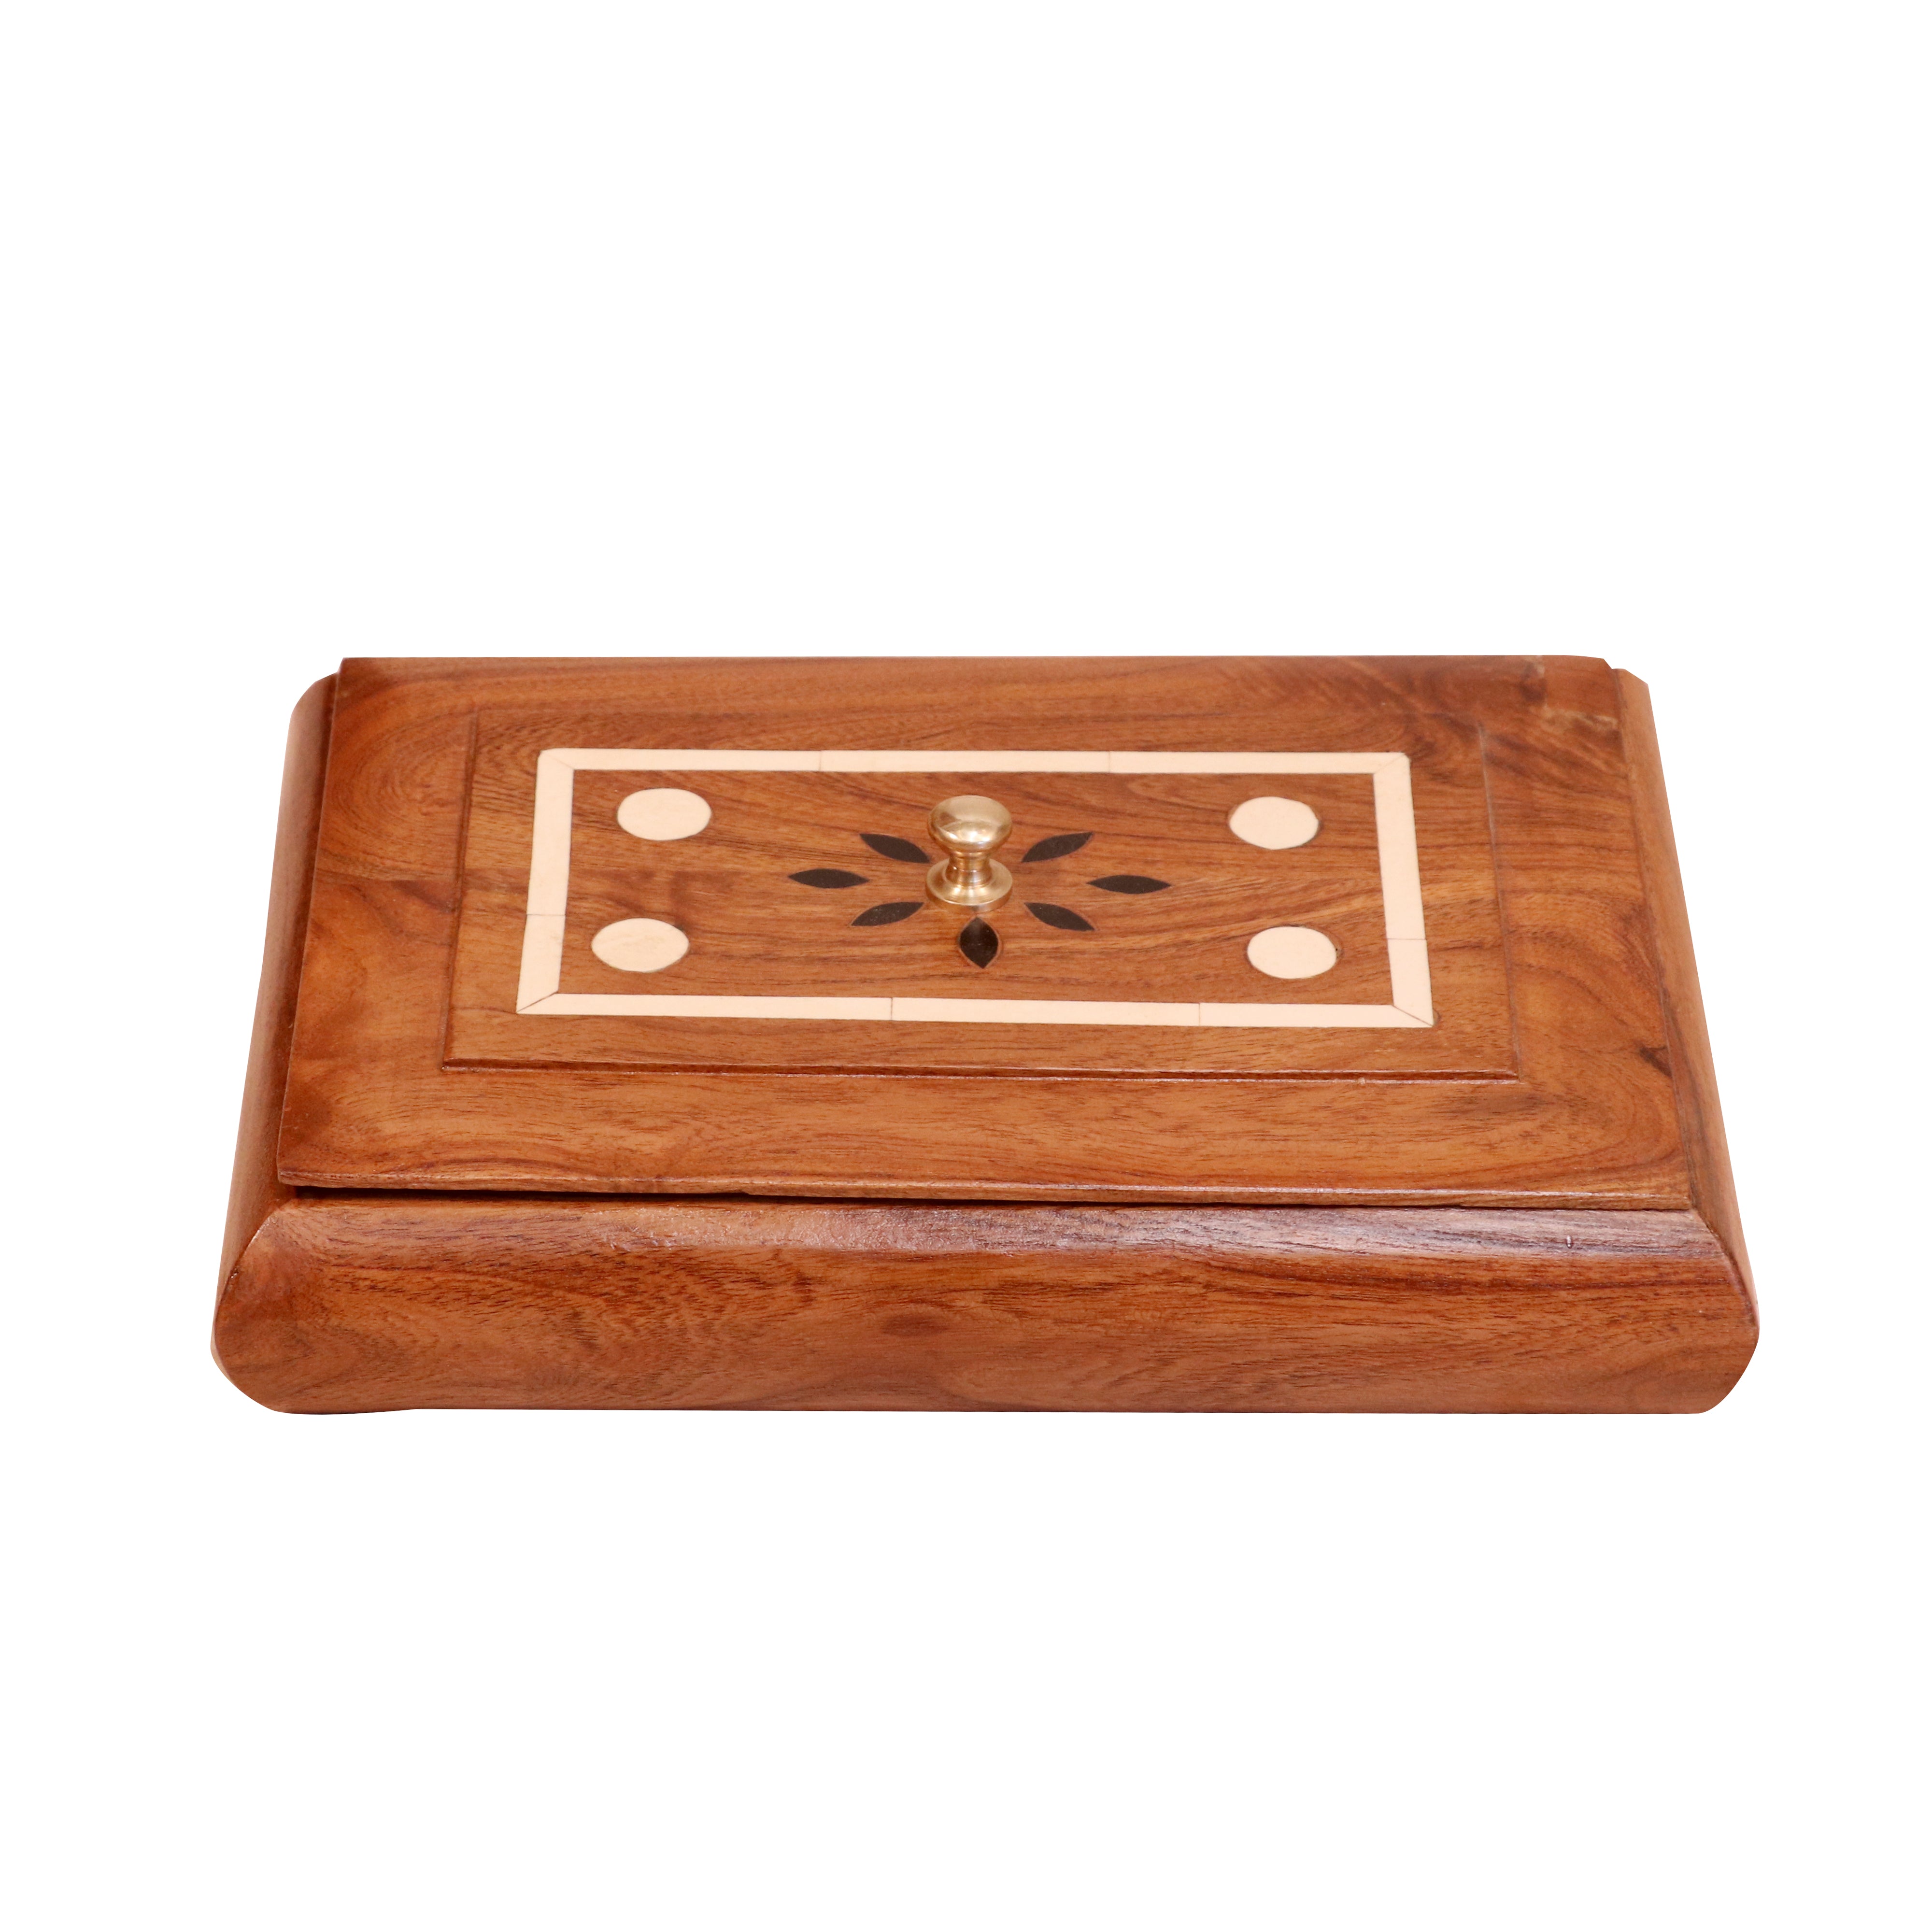 Beautiful Multi Slots Handmade Inlay Designed Handy Wooden Box for Home Wooden Box